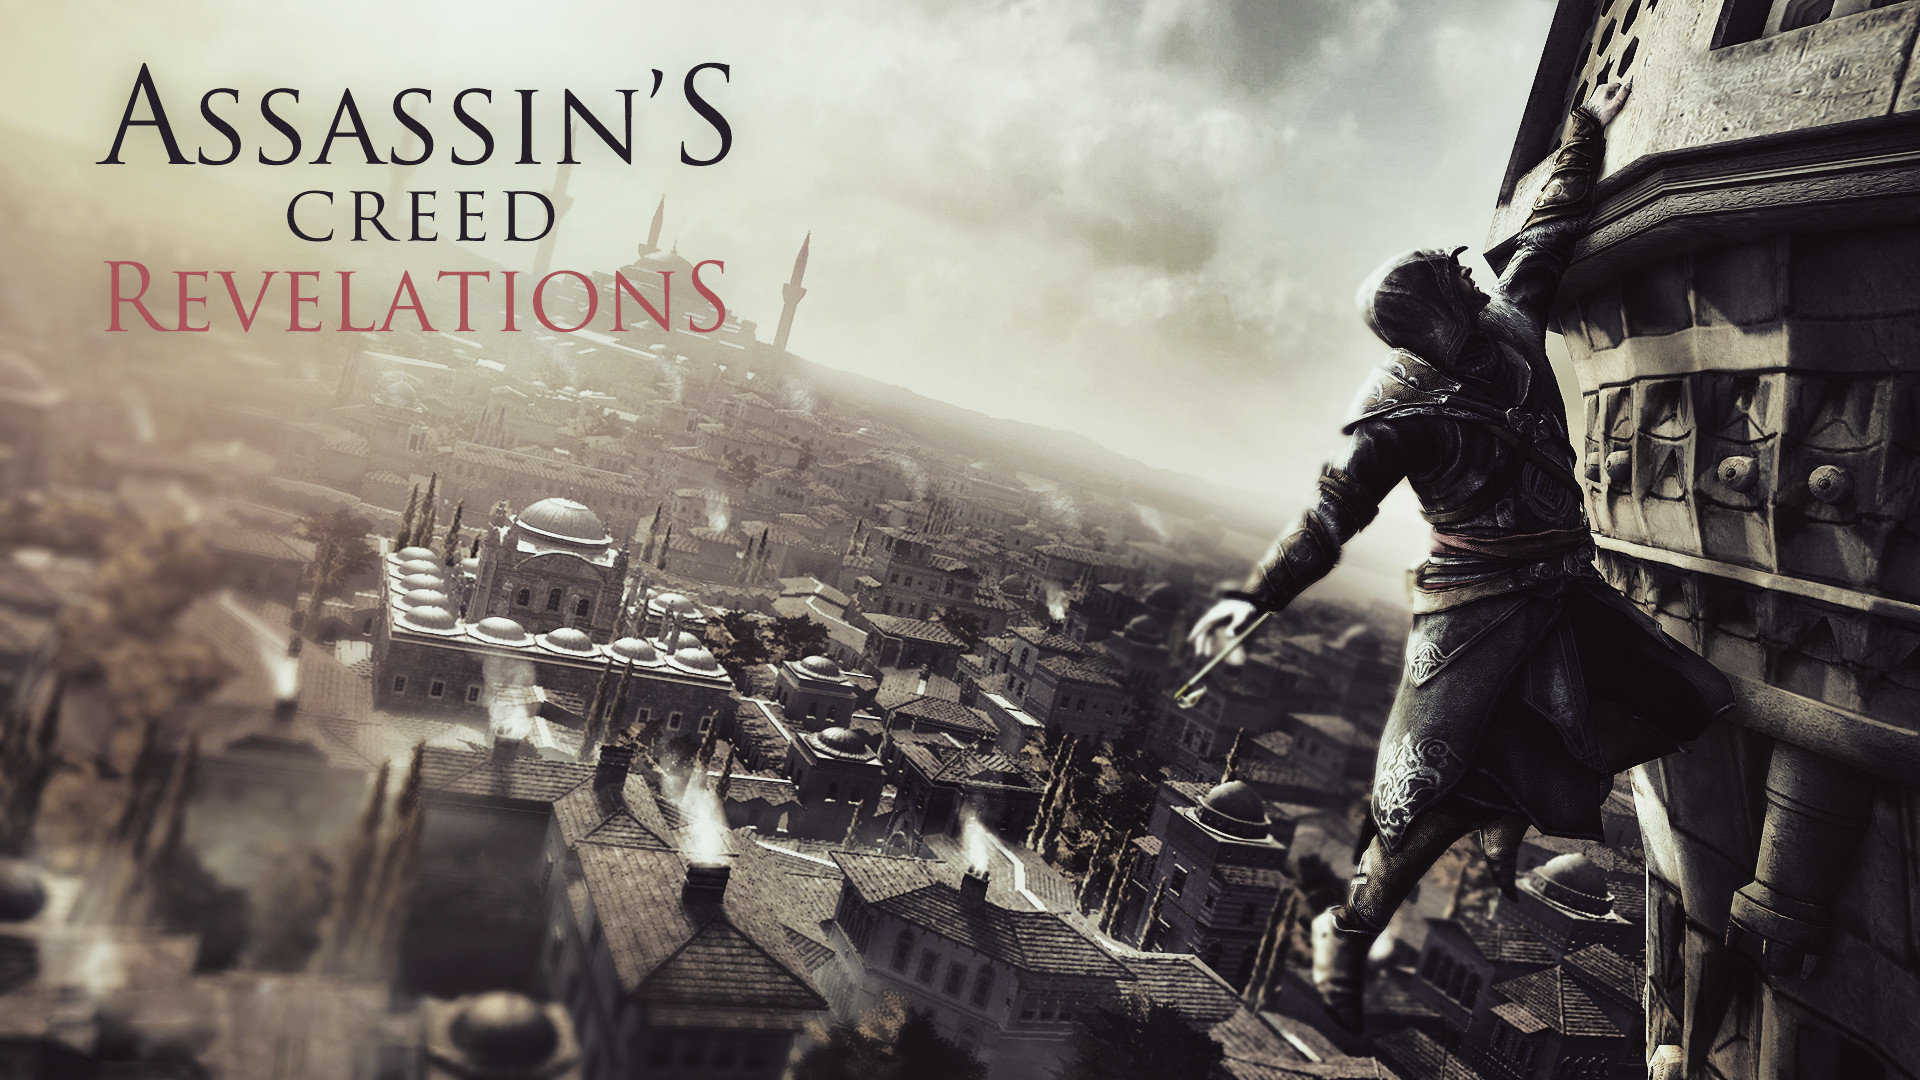 Let’s Play Assassin’s Creed Revelations